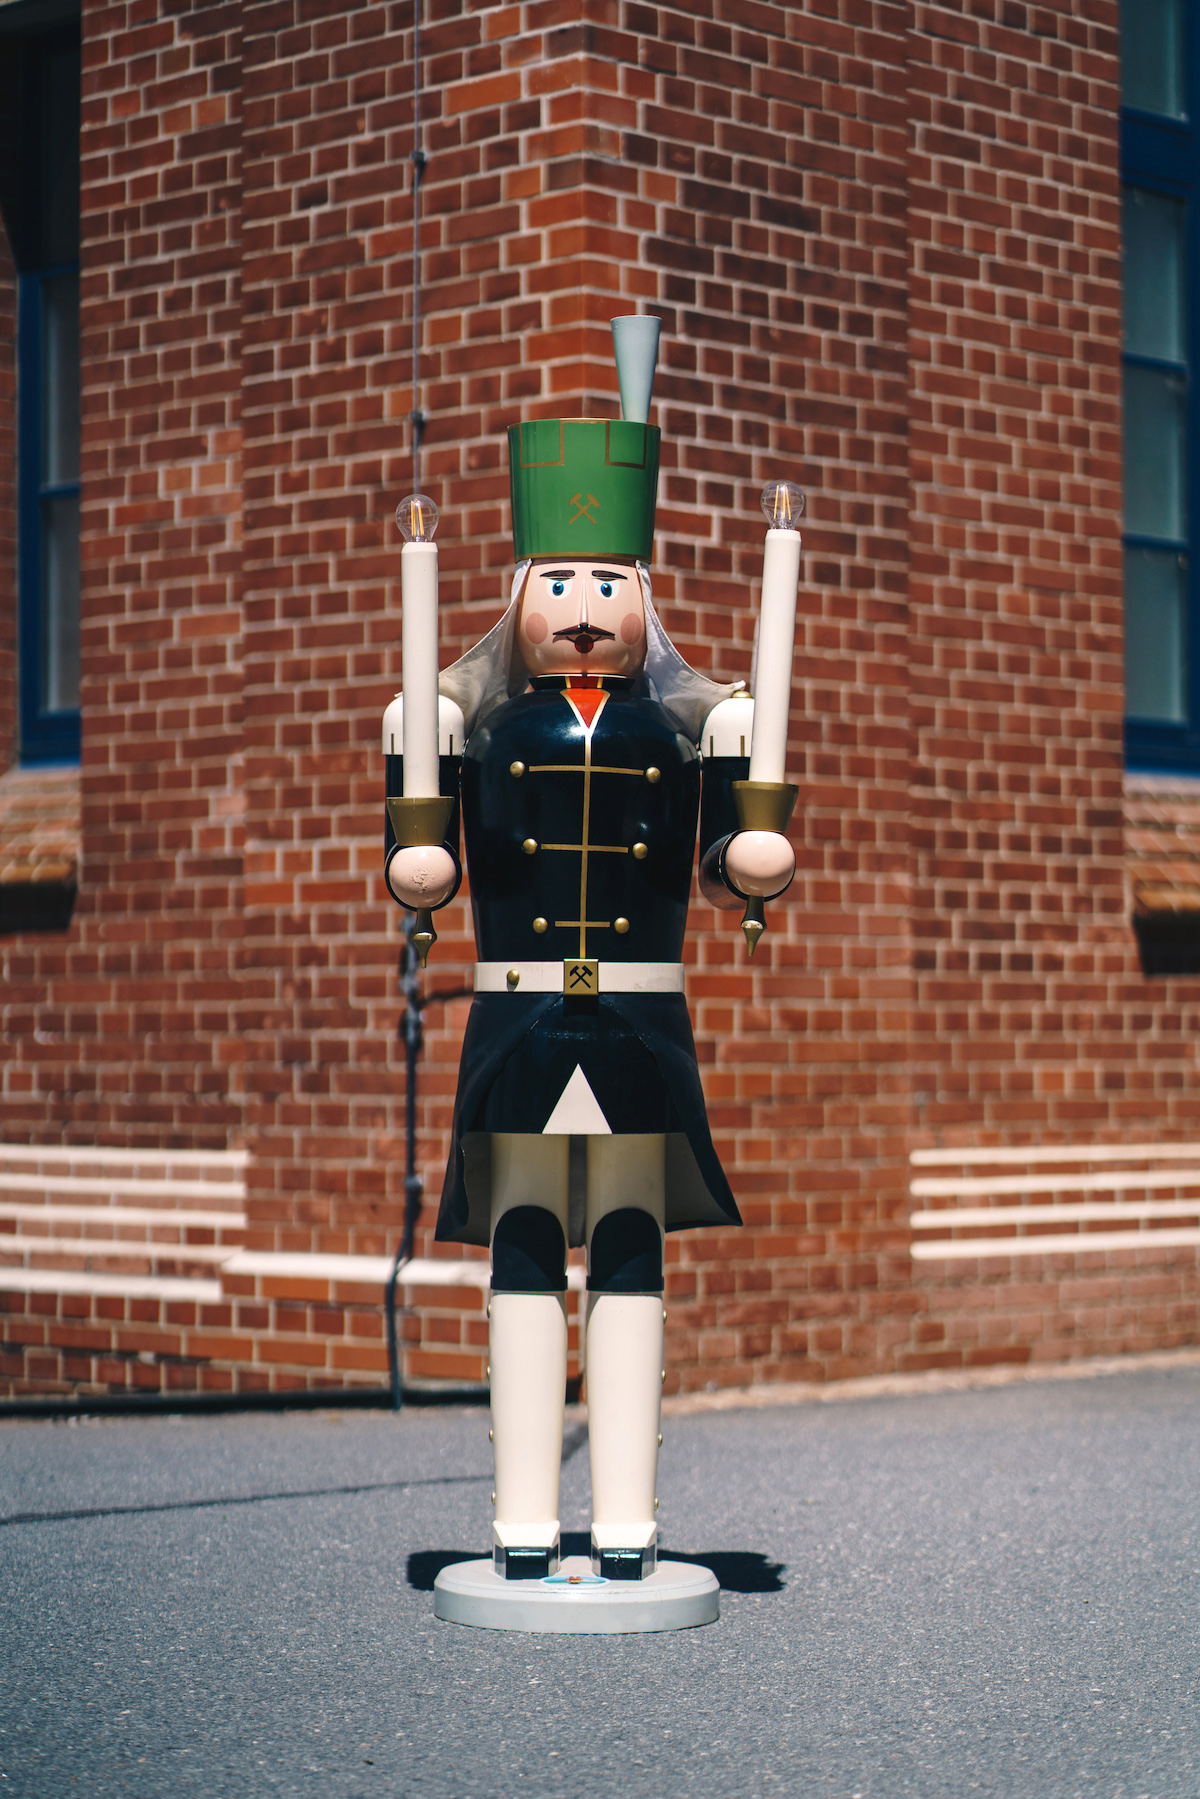 A black and white-green life-size miner made of wood stands in front of a wall made of bricks.